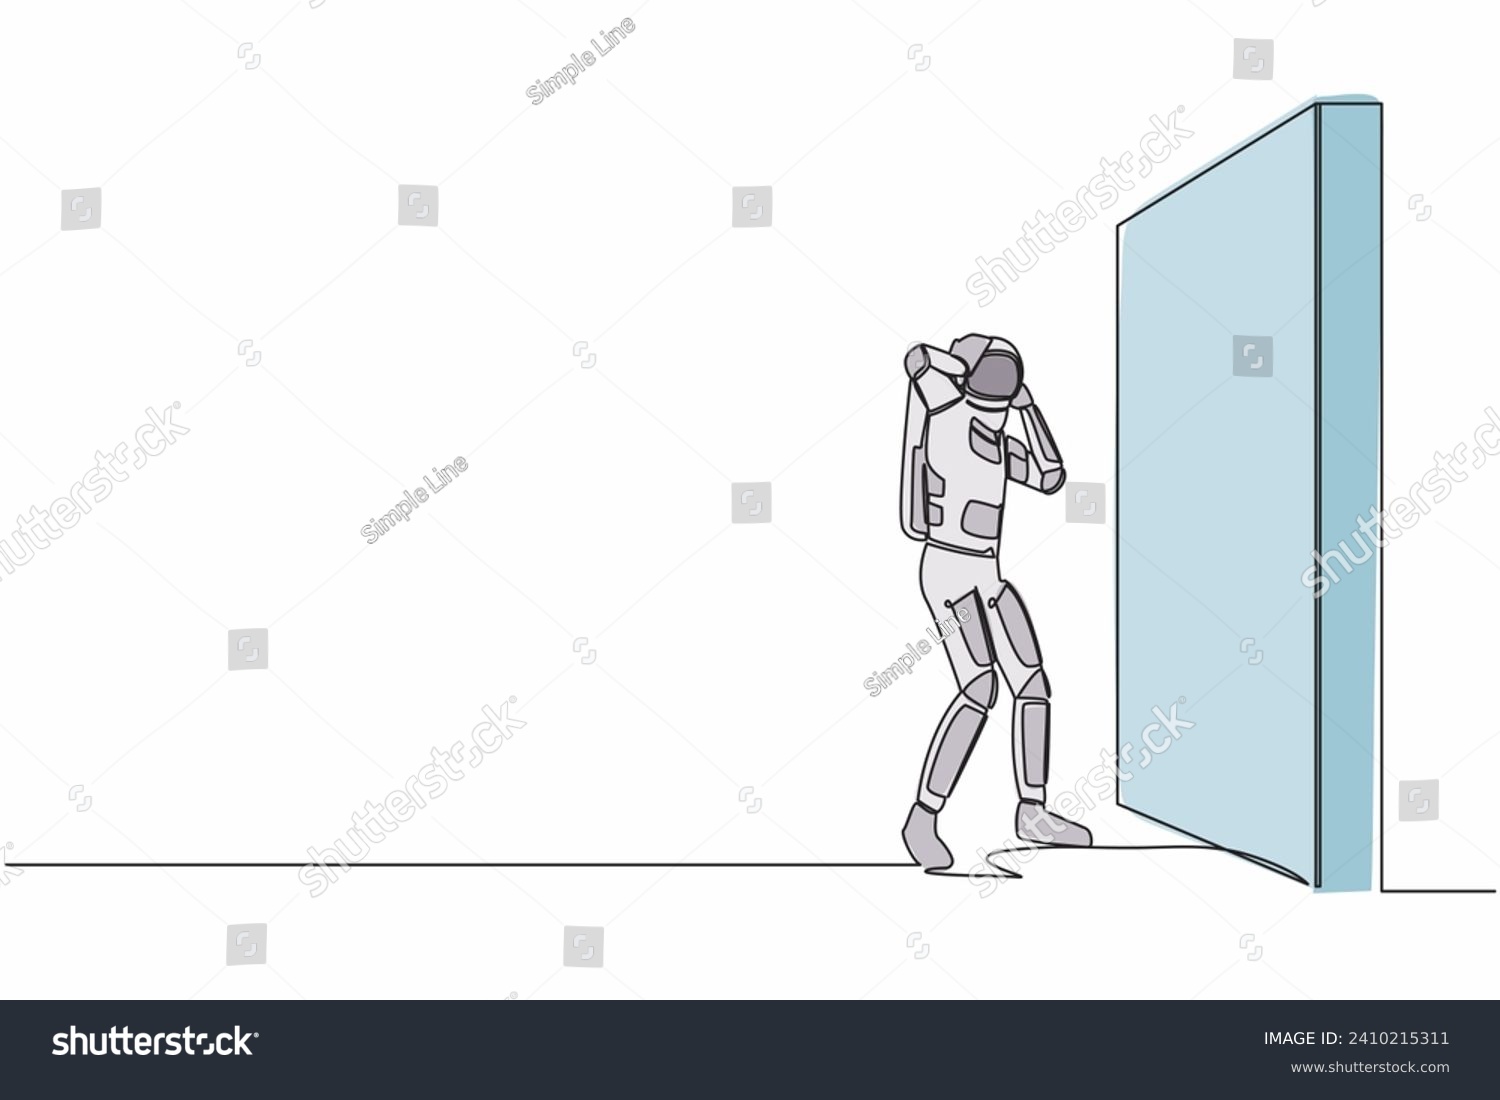 SVG of Continuous one line drawing of astronaut standing and confused in front of brick wall barriers. Stressed due to space expedition. Cosmonaut outer space. Single line graphic design vector illustration svg